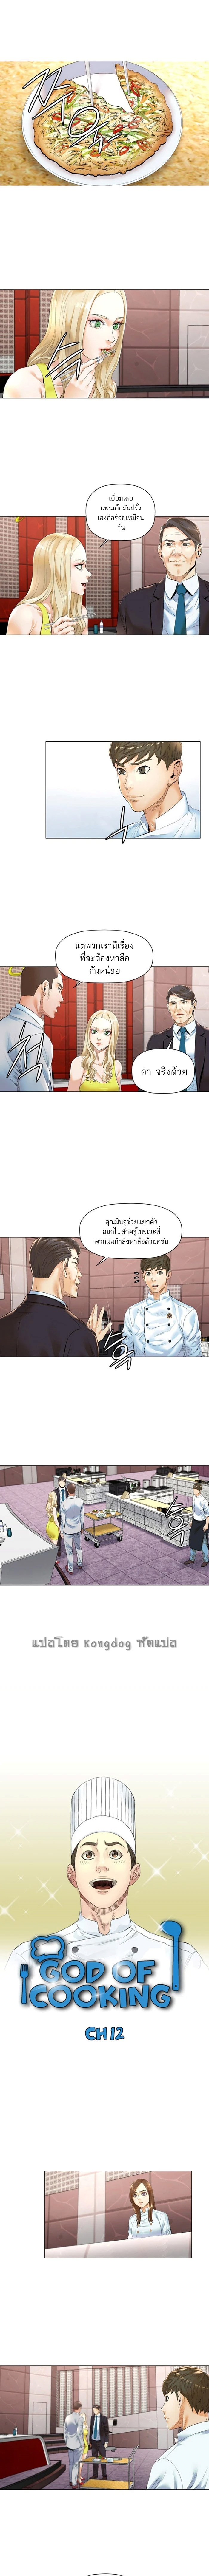 God of Cooking 12 (2)